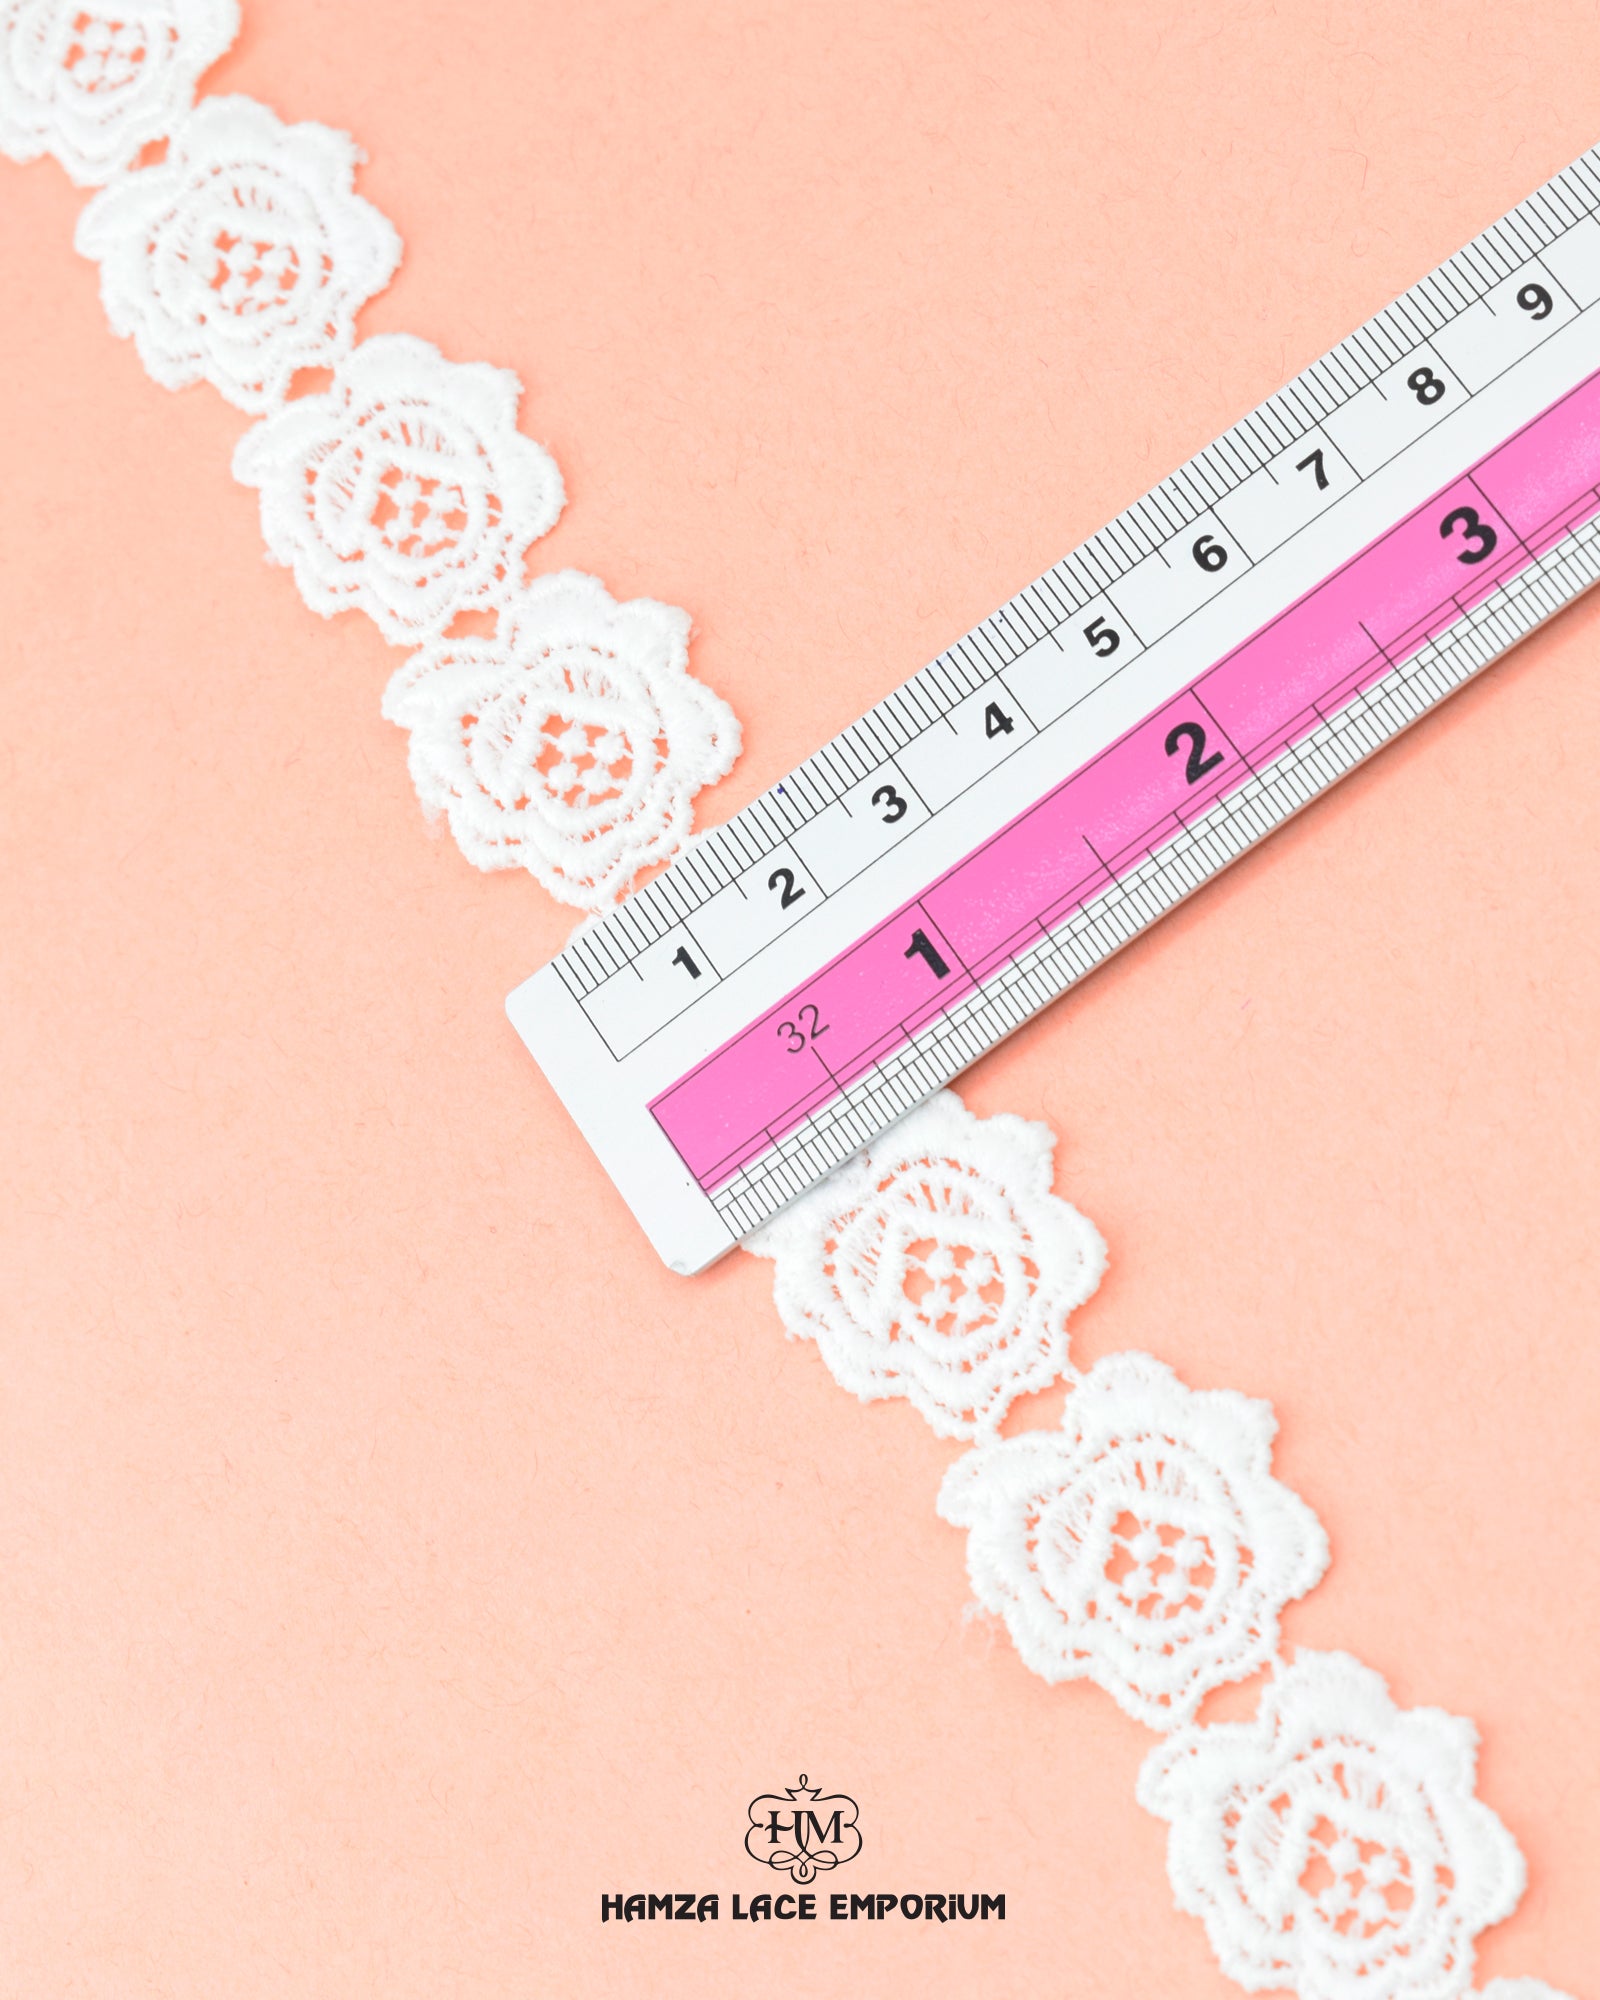 A ruler is showing the size of the 'Center Flower Lace 5500' as 1 inch